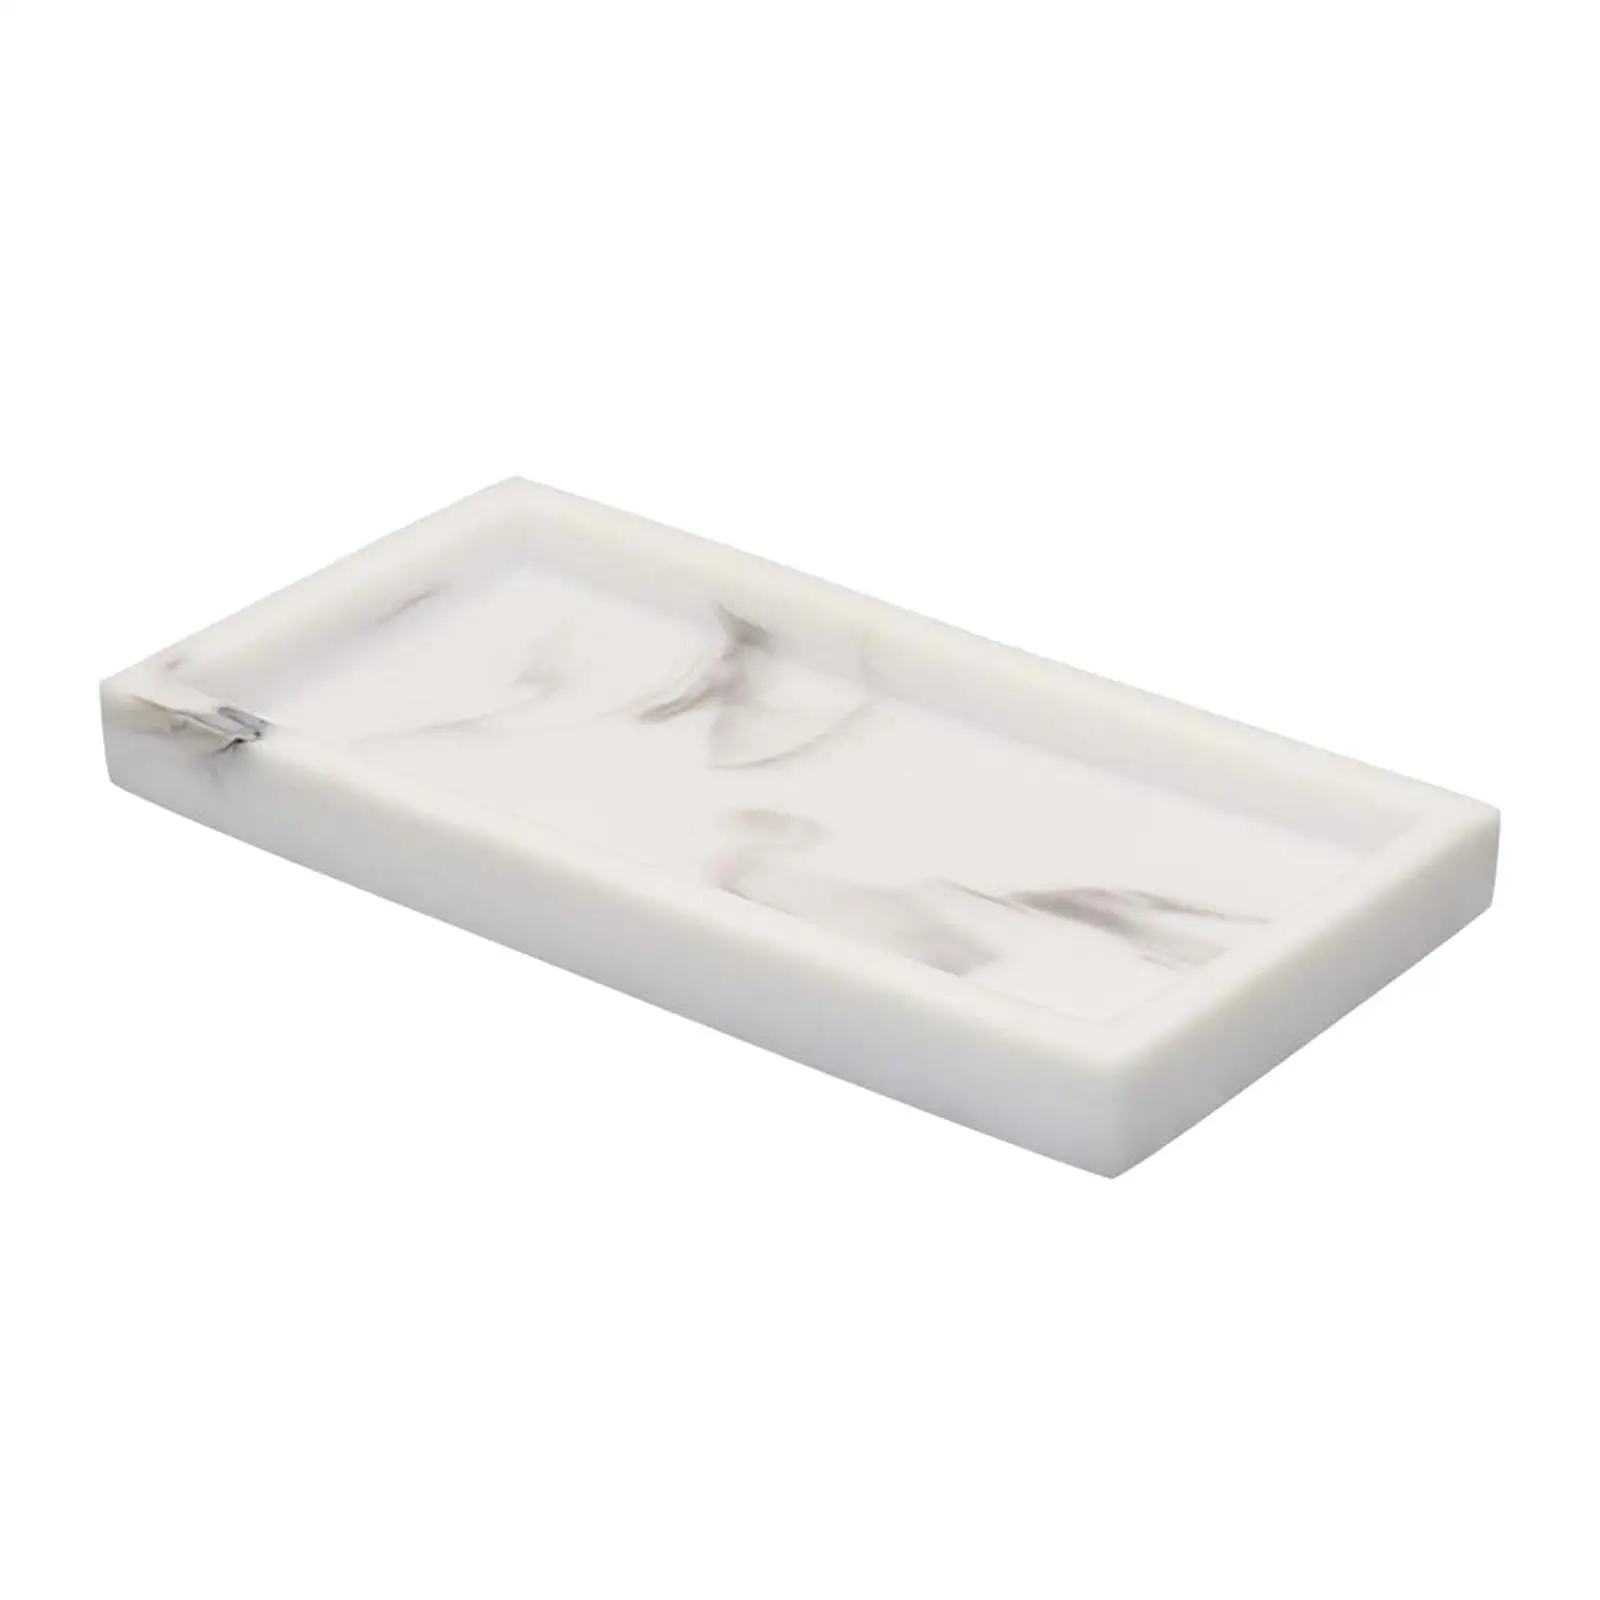 Imitation Marble Resin Handmade Bathtub Serving Tray Plate for Jewelry Soap